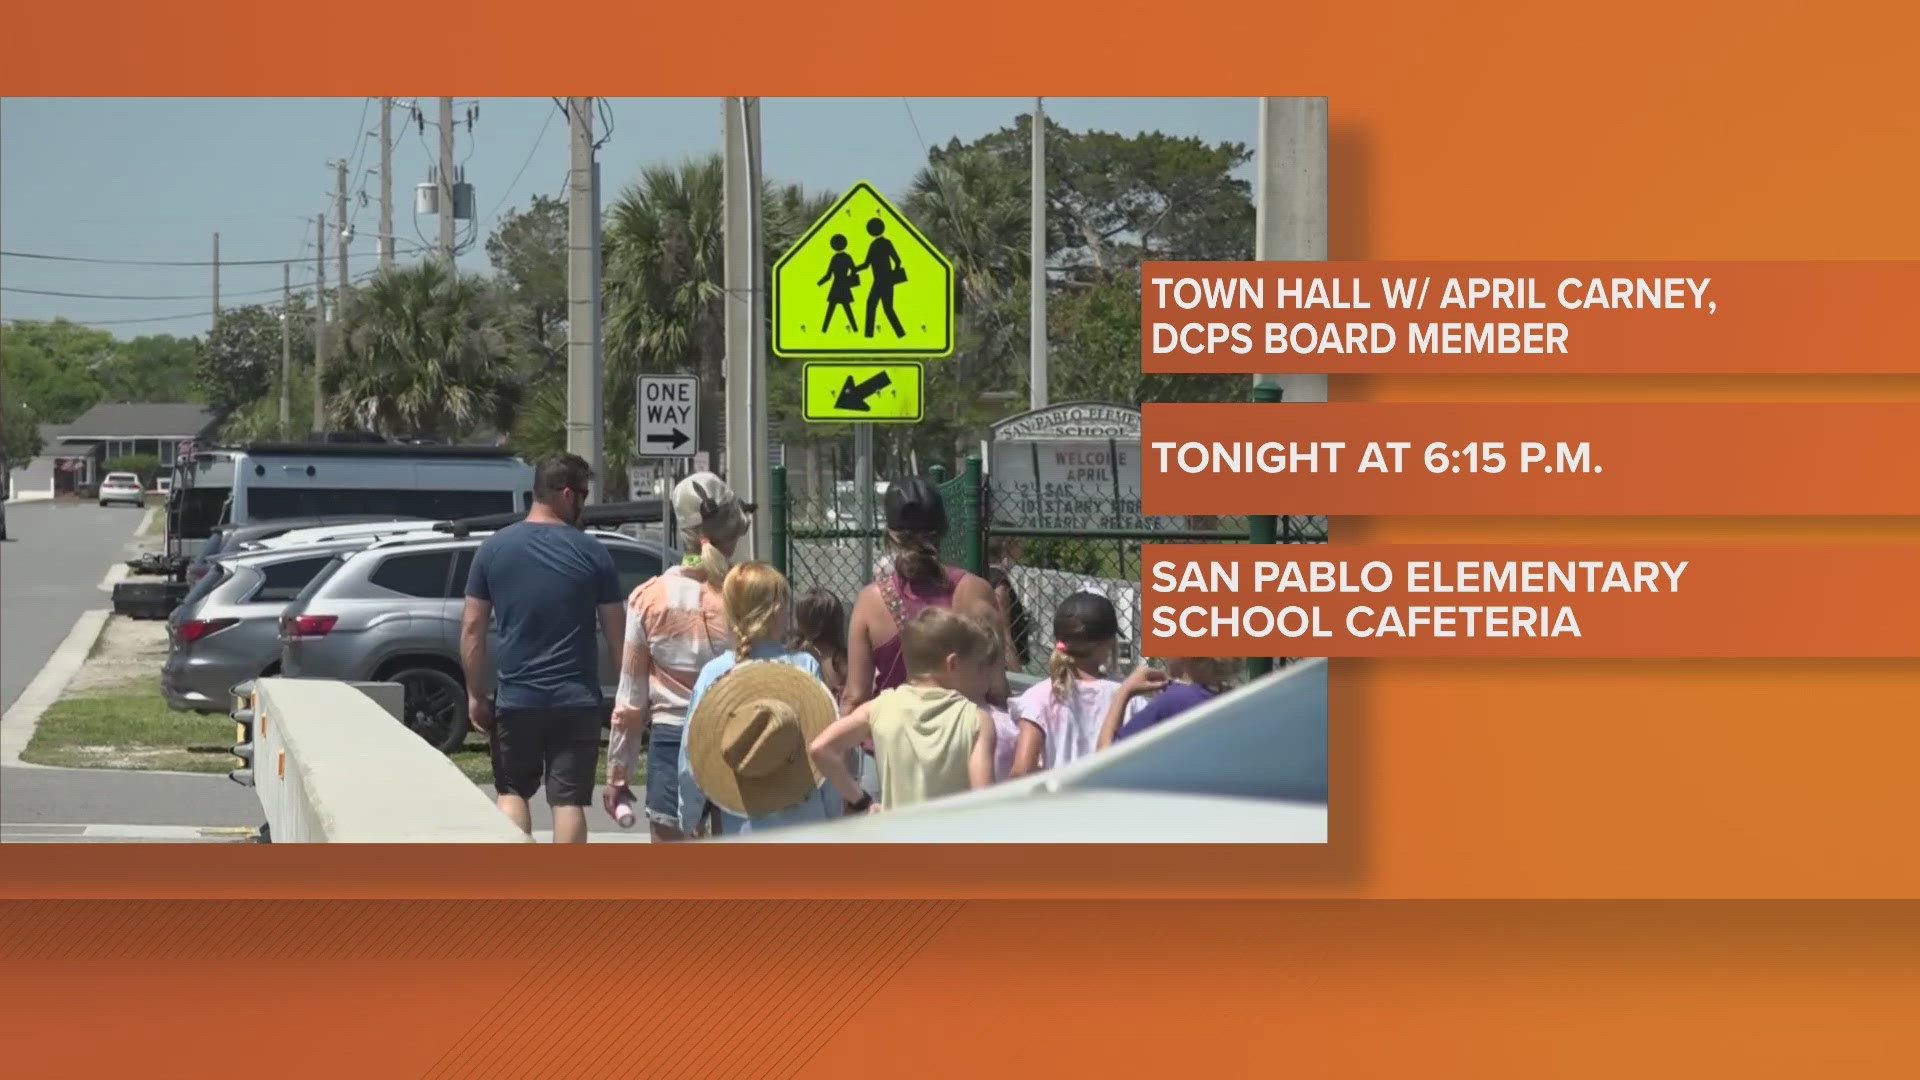 The town hall meeting will take place inside of San Pablo Elementary's cafeteria. DCPS identified the school as a candidate to close due to budget constraints.